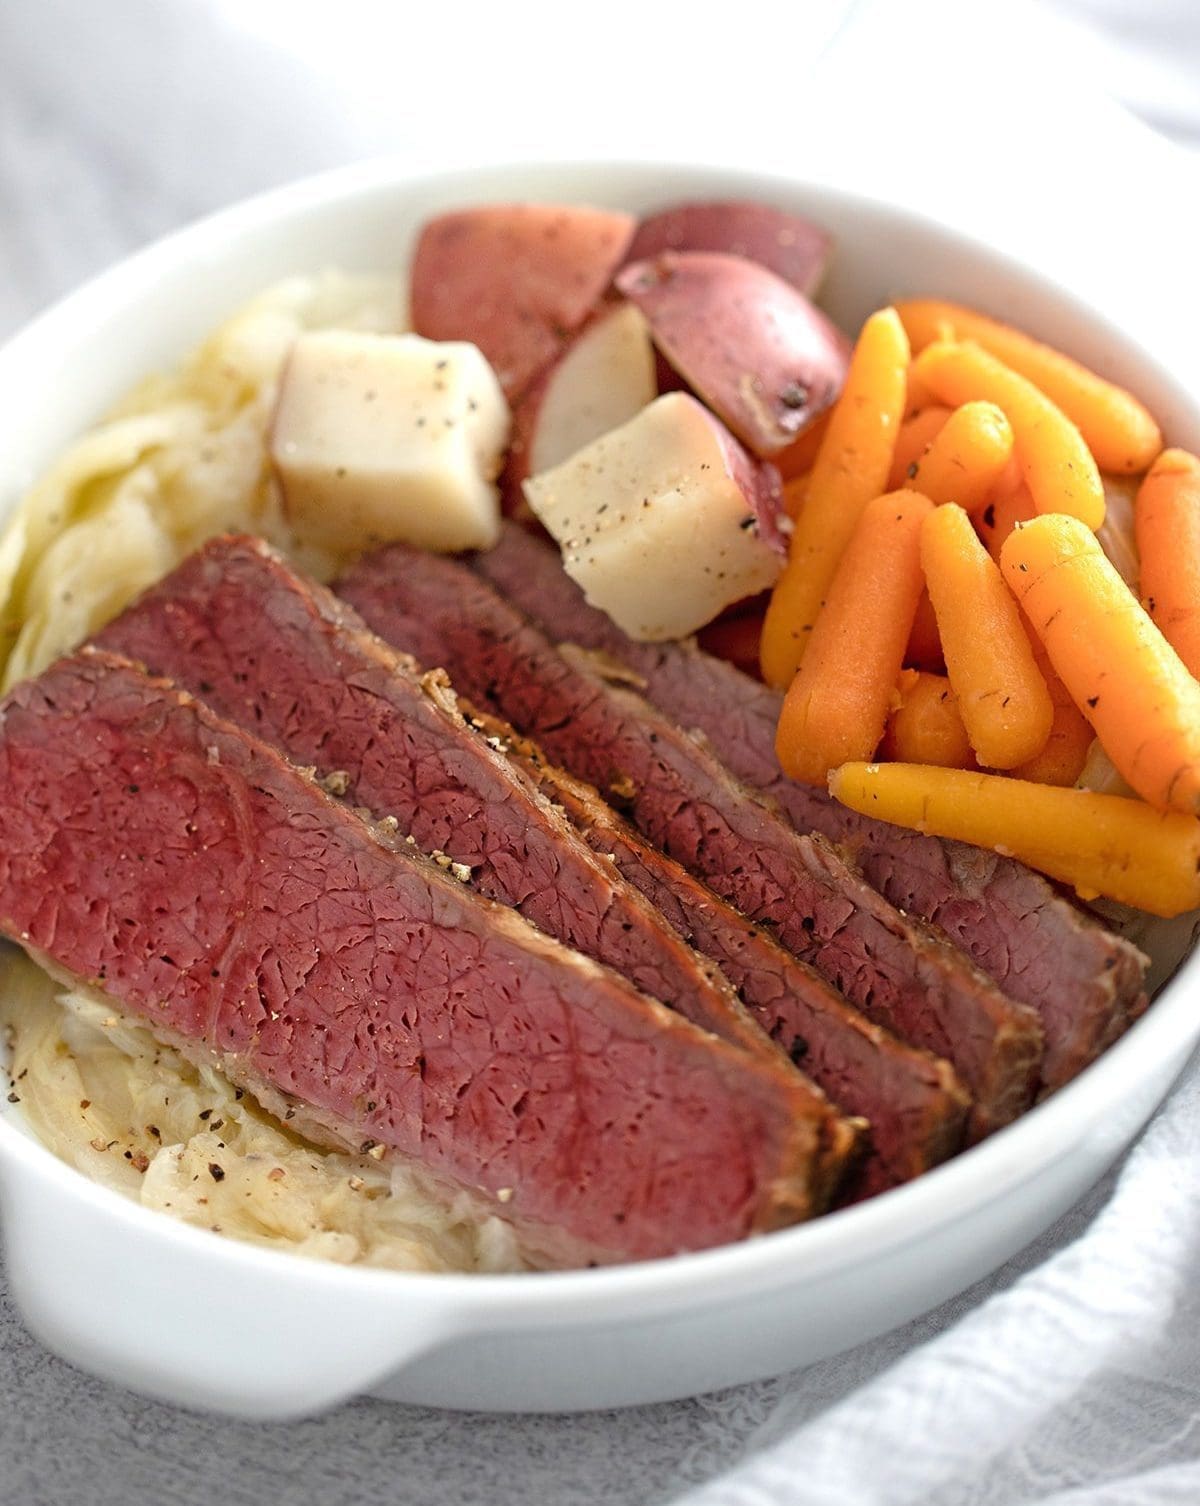 Instant Pot Corned Beef, carrots, cabbage and potatoes in a white bowl.